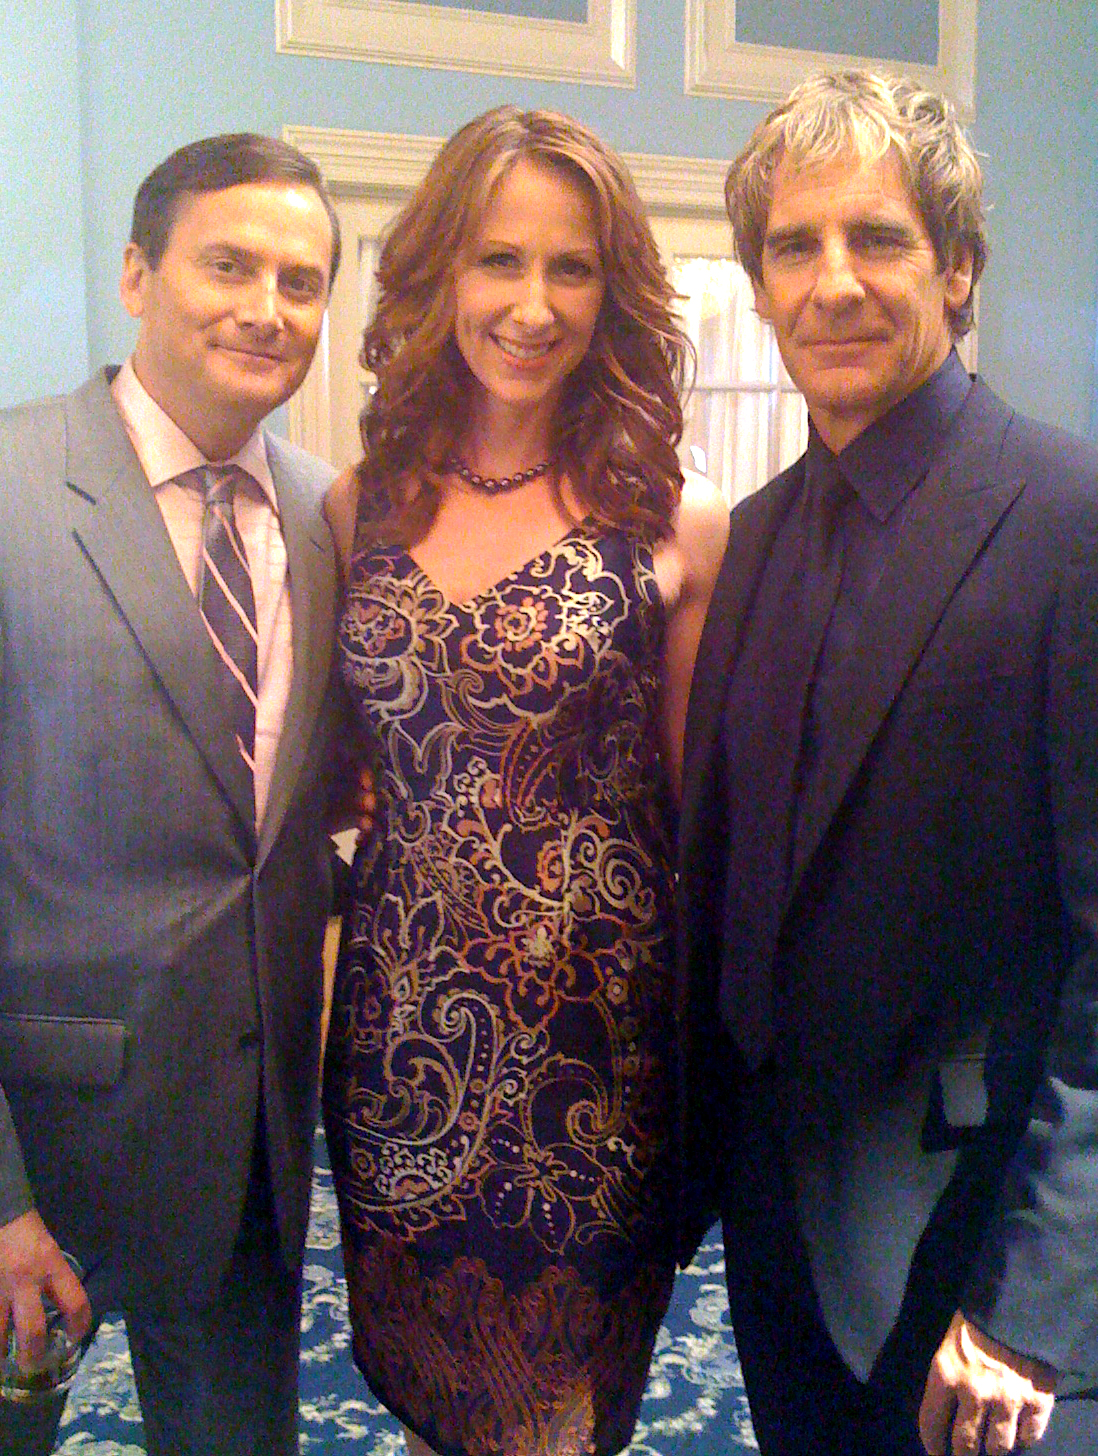 Michael Hitchcock, Wendy Braun and Scott Bakula on the set of Men Of A Certain Age.